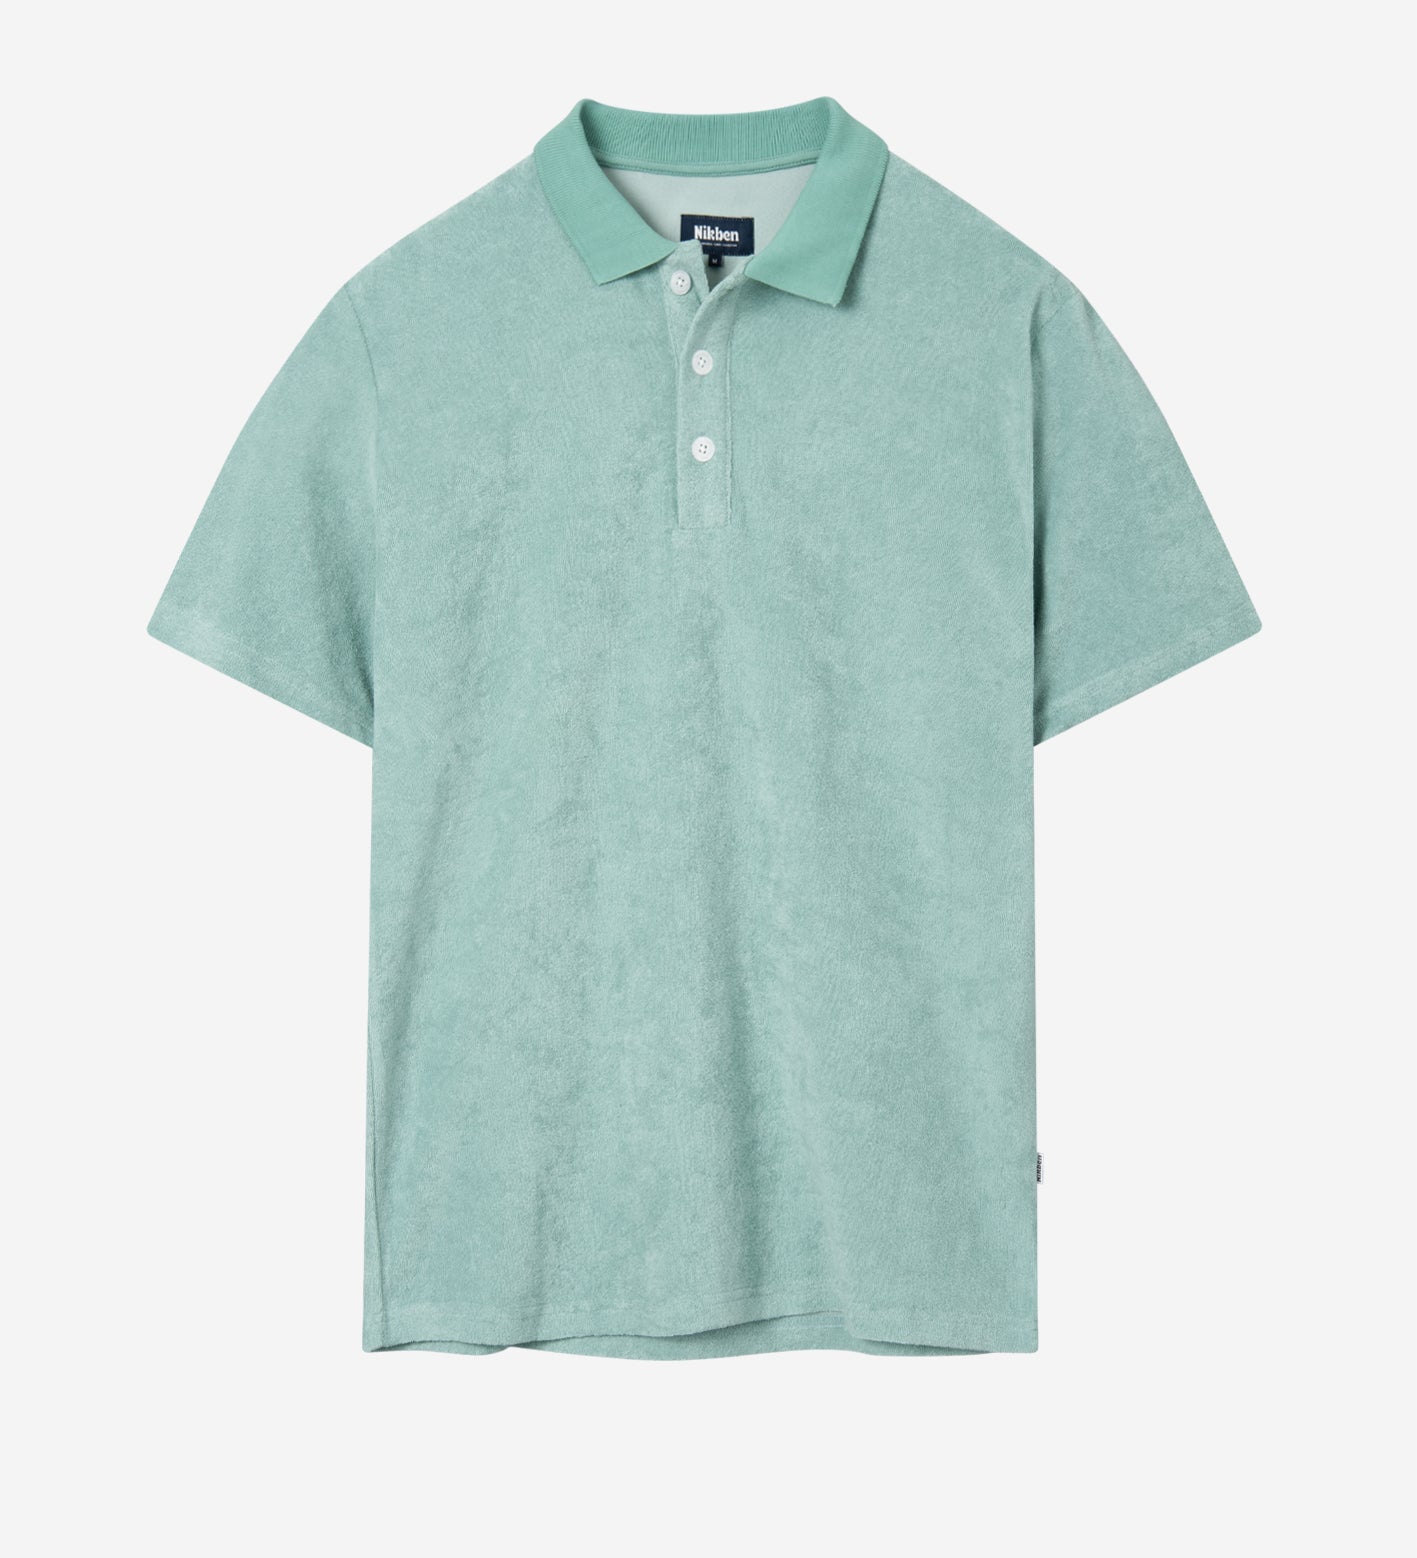 Grey-green short sleeve piké shirt in terry toweling fabric.